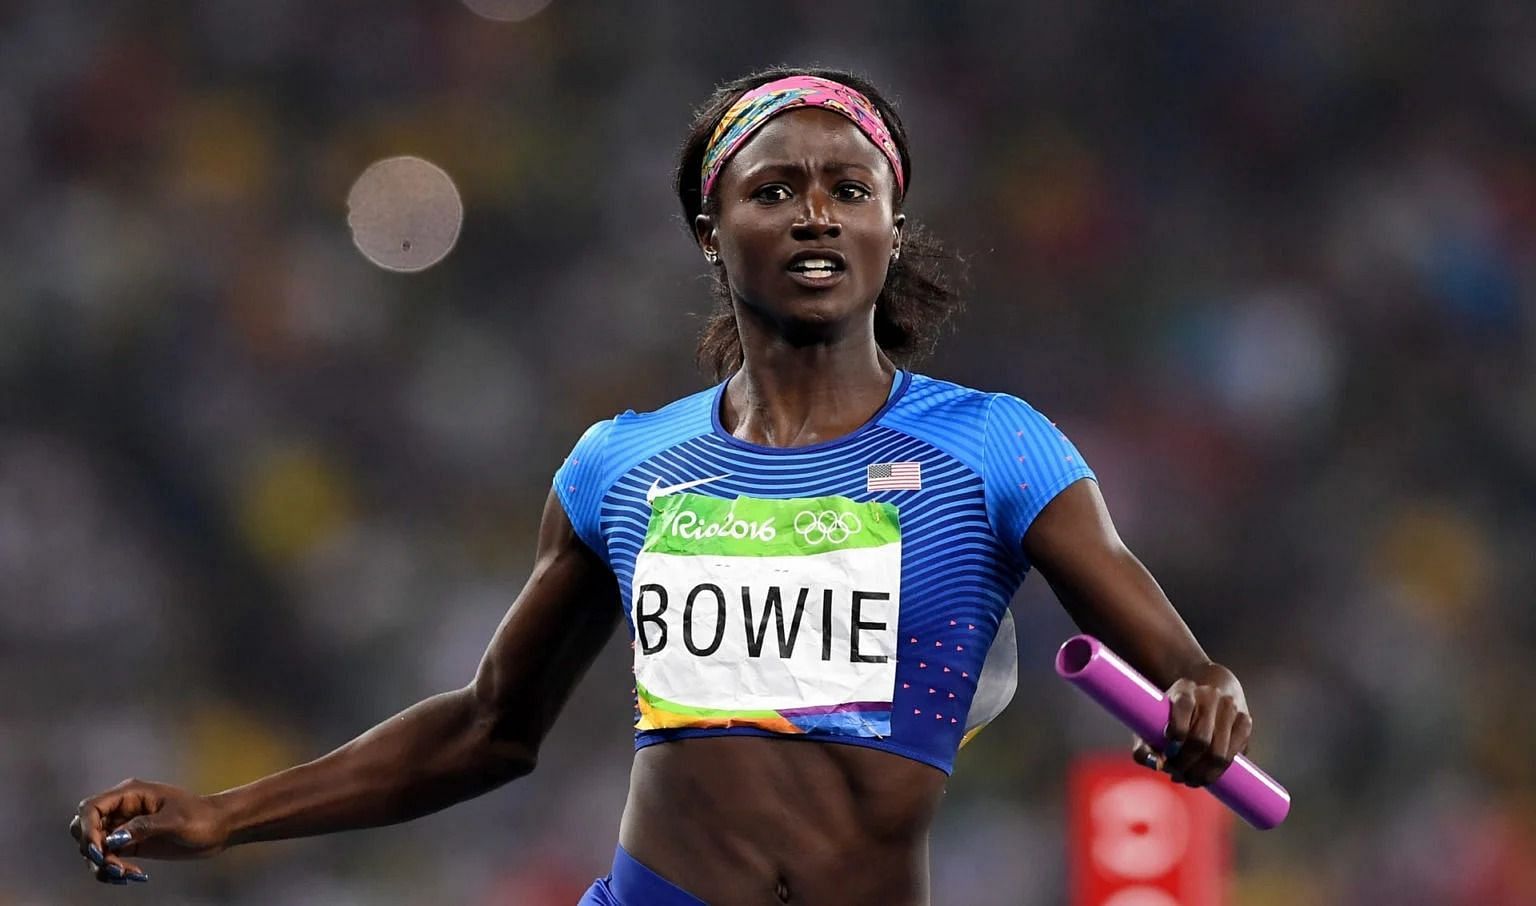 Olympian Tori Bowie (Image via Getty Images)